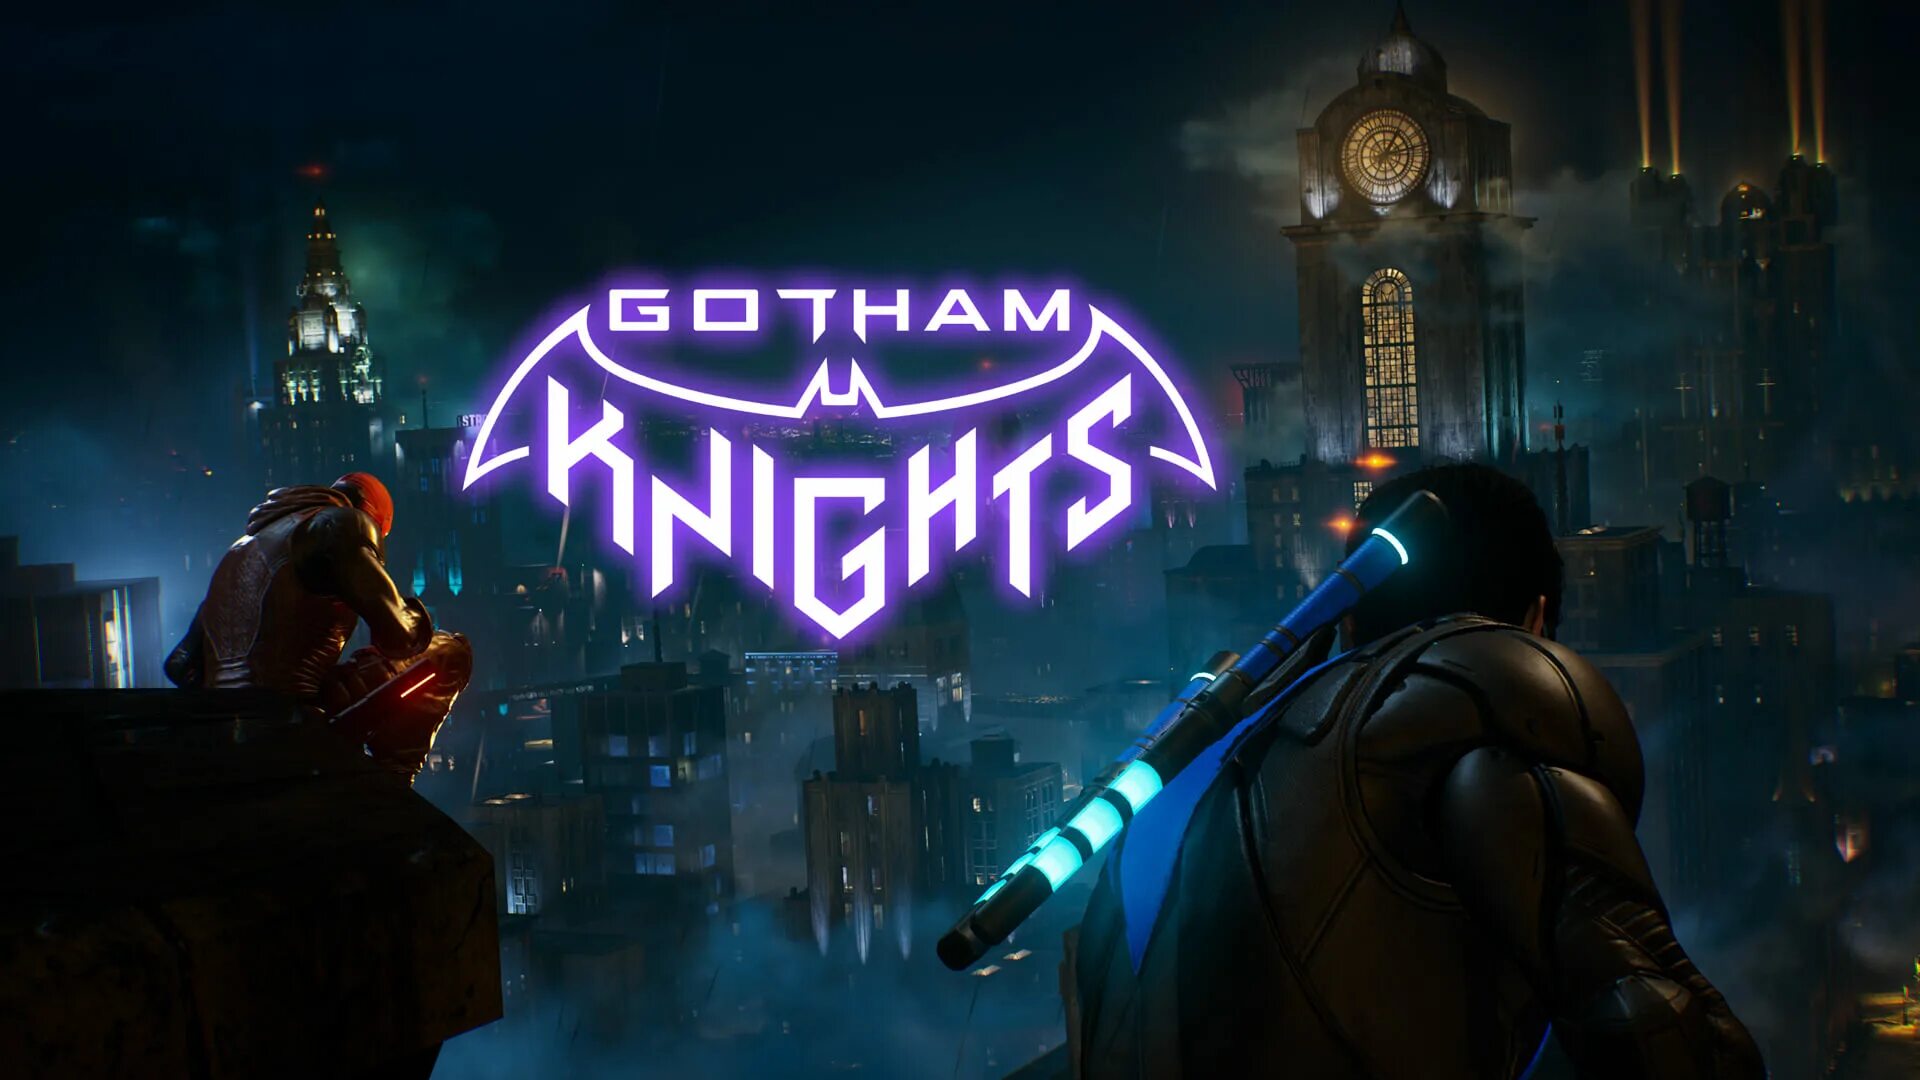 Knight ps5. Gotham Knights / Рыцари Готэма. Бэтмен рыцарь Готэма игра. Рыцари Готэма игра 2022. Batman 2022 игра.